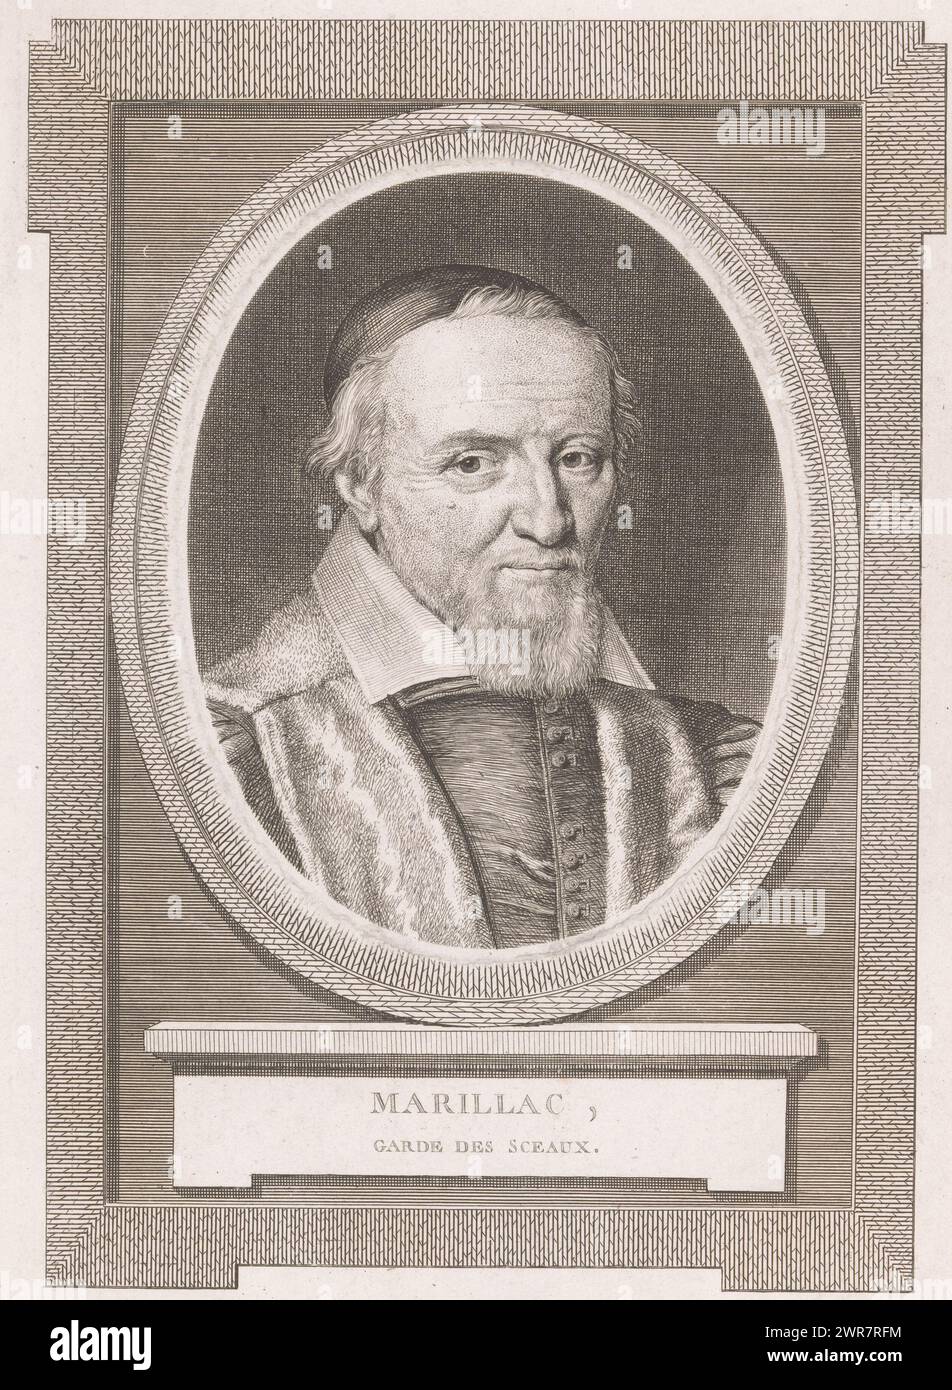 Portrait of Michel de Marillac, Marillac, Garde des Sceaux (title on object), print maker: Jean Morin, after painting by: Philippe de Champaigne, 1630 - 1790, paper, etching, engraving, height 296 mm × width 214 mm × height 171 mm × width 134 mm, print Stock Photo